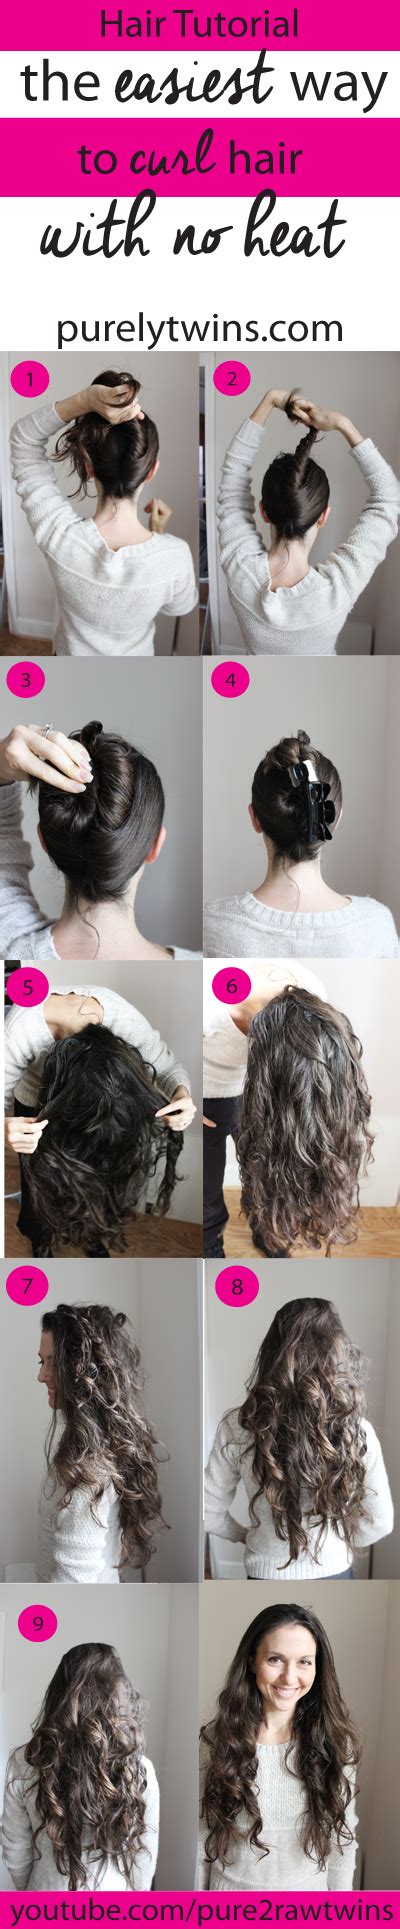 The Easiest Way To Curl Your Hair Without Heat